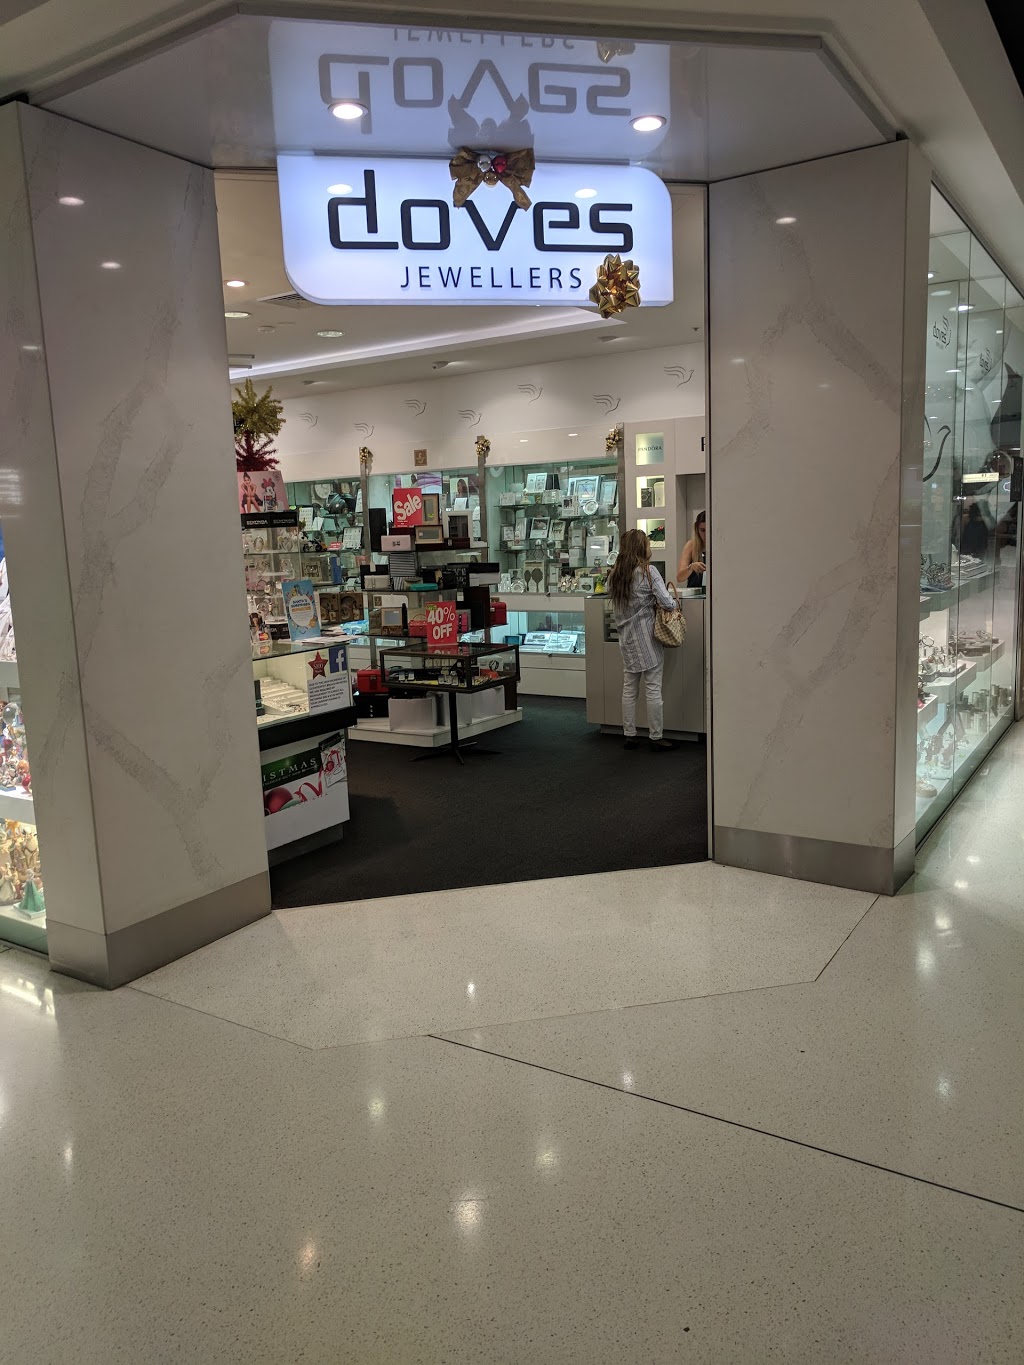 Doves Jewellers | jewelry store | Shop 29 The Village Shopping Center 10 Charles Hackett Drive St Marys NSW 2760 AU, 10 Charles Hackett Dr, St Marys NSW 2760, Australia | 0296231655 OR +61 2 9623 1655